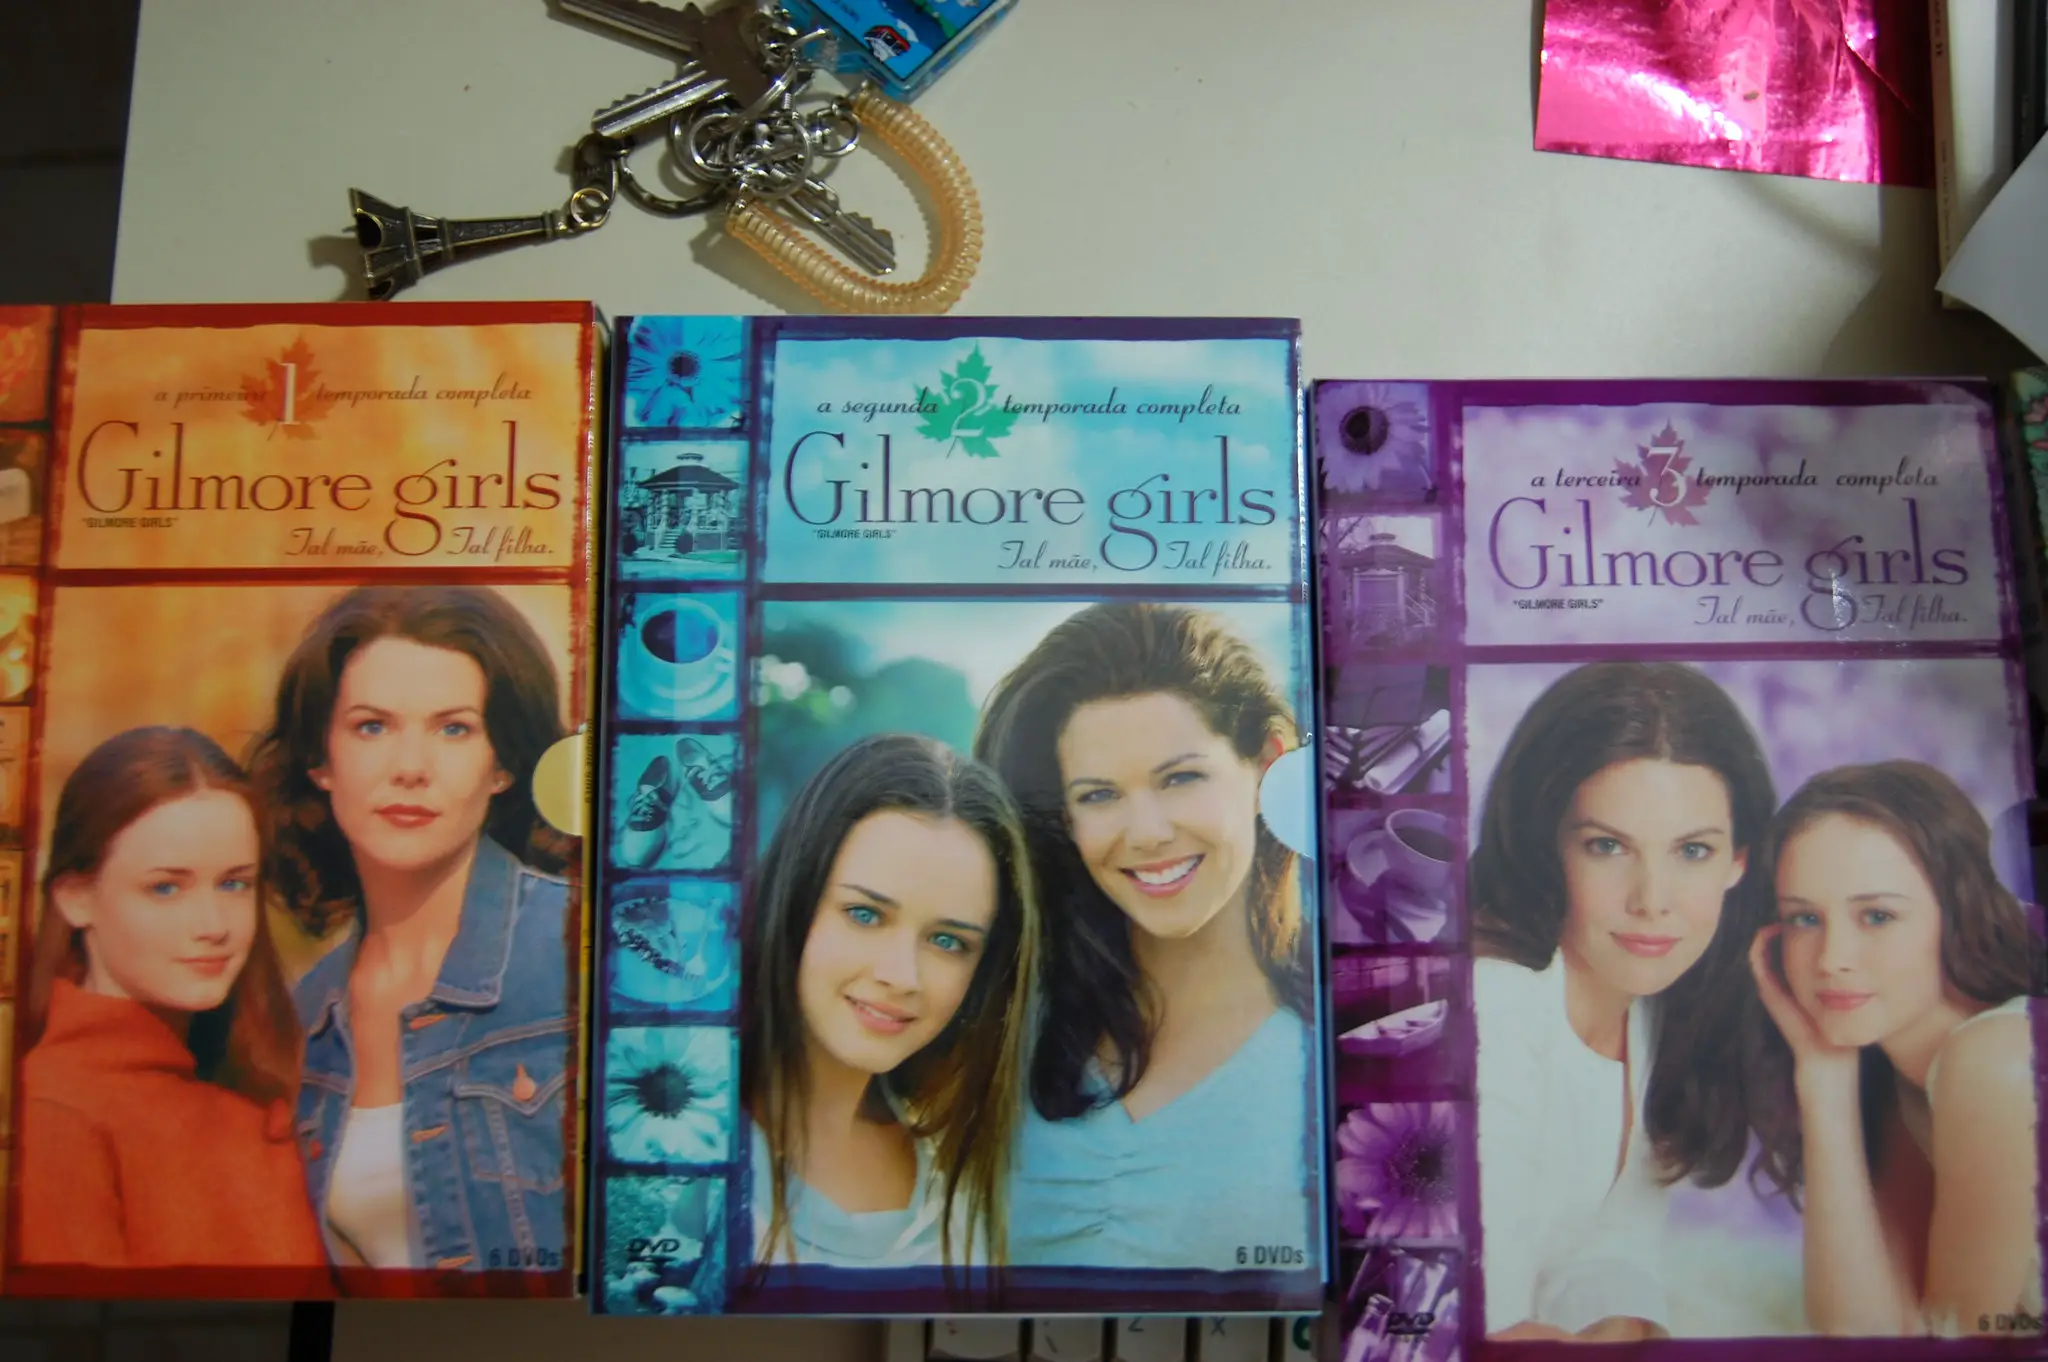 45 Gilmore Girls Quotes About Love, Coffee & More